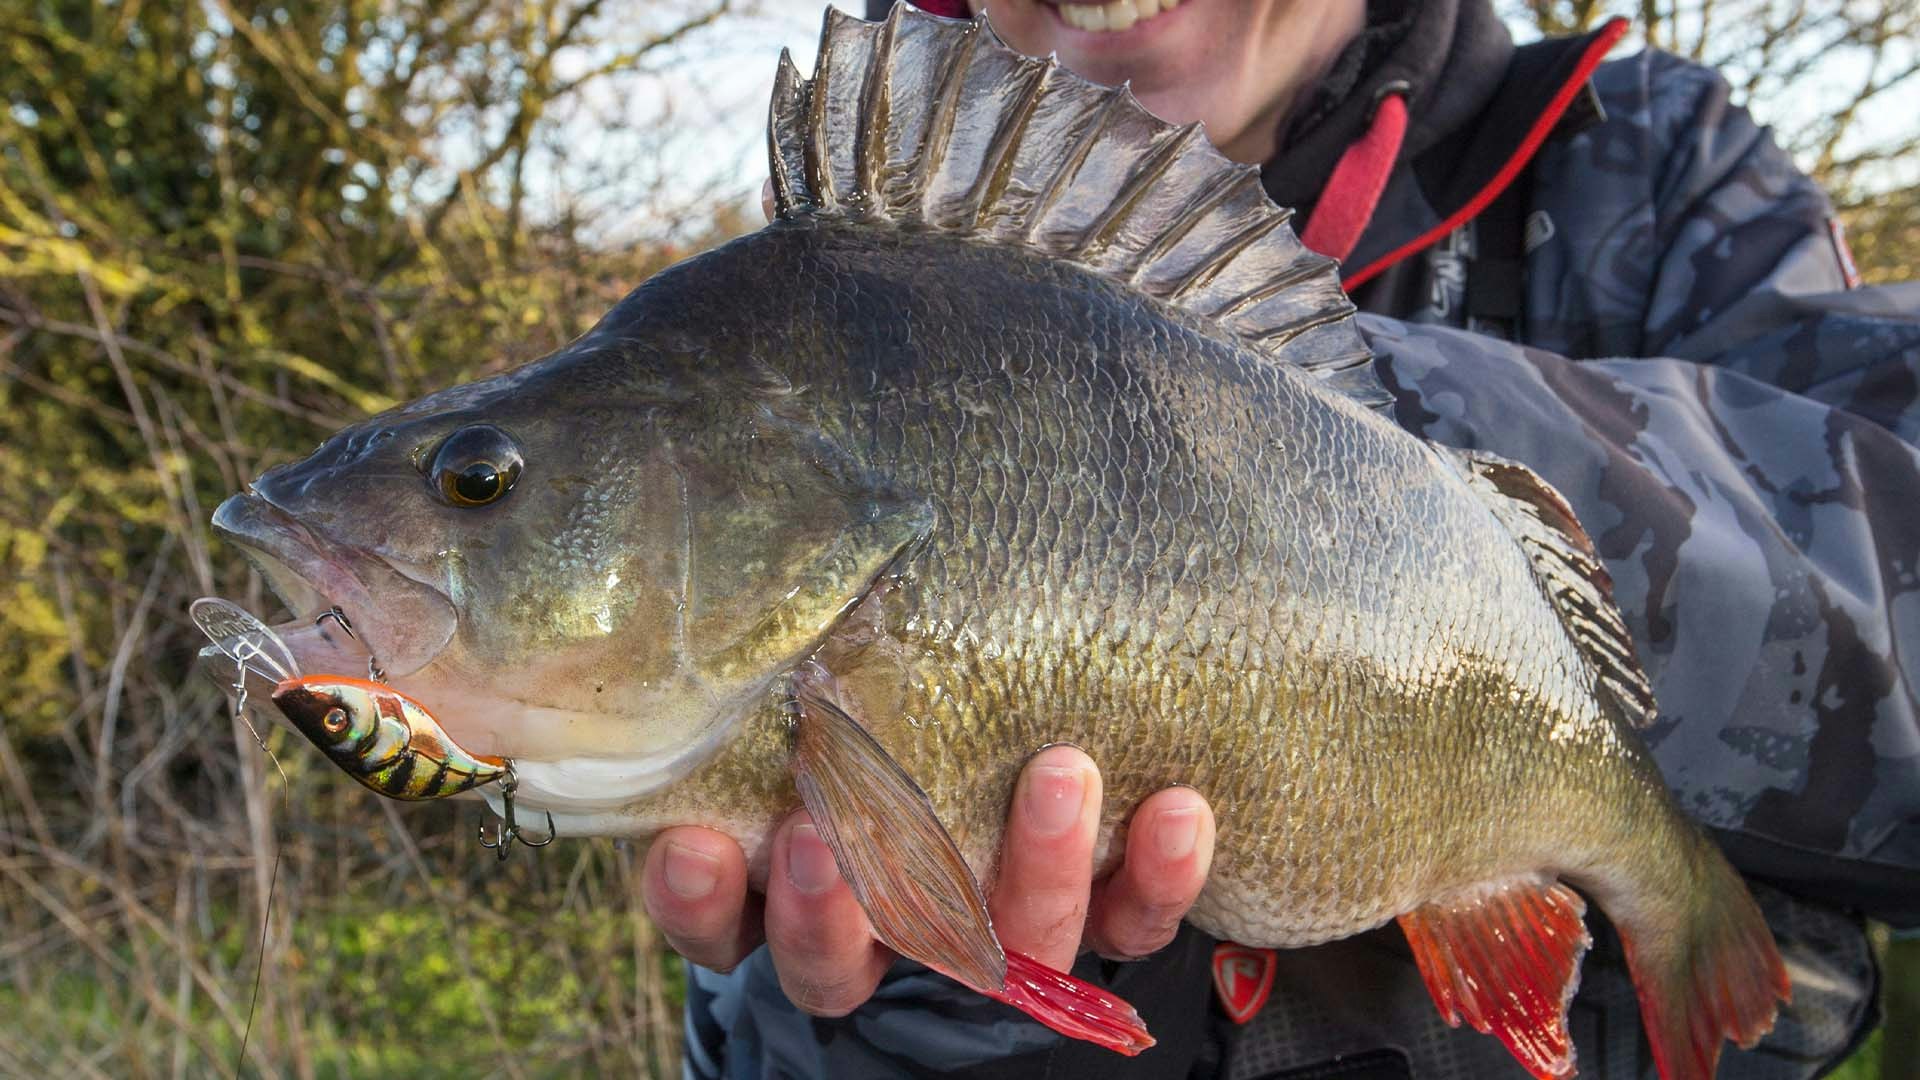 River Perch Fishing: Stop Relying on Luck to Catch Big Perch